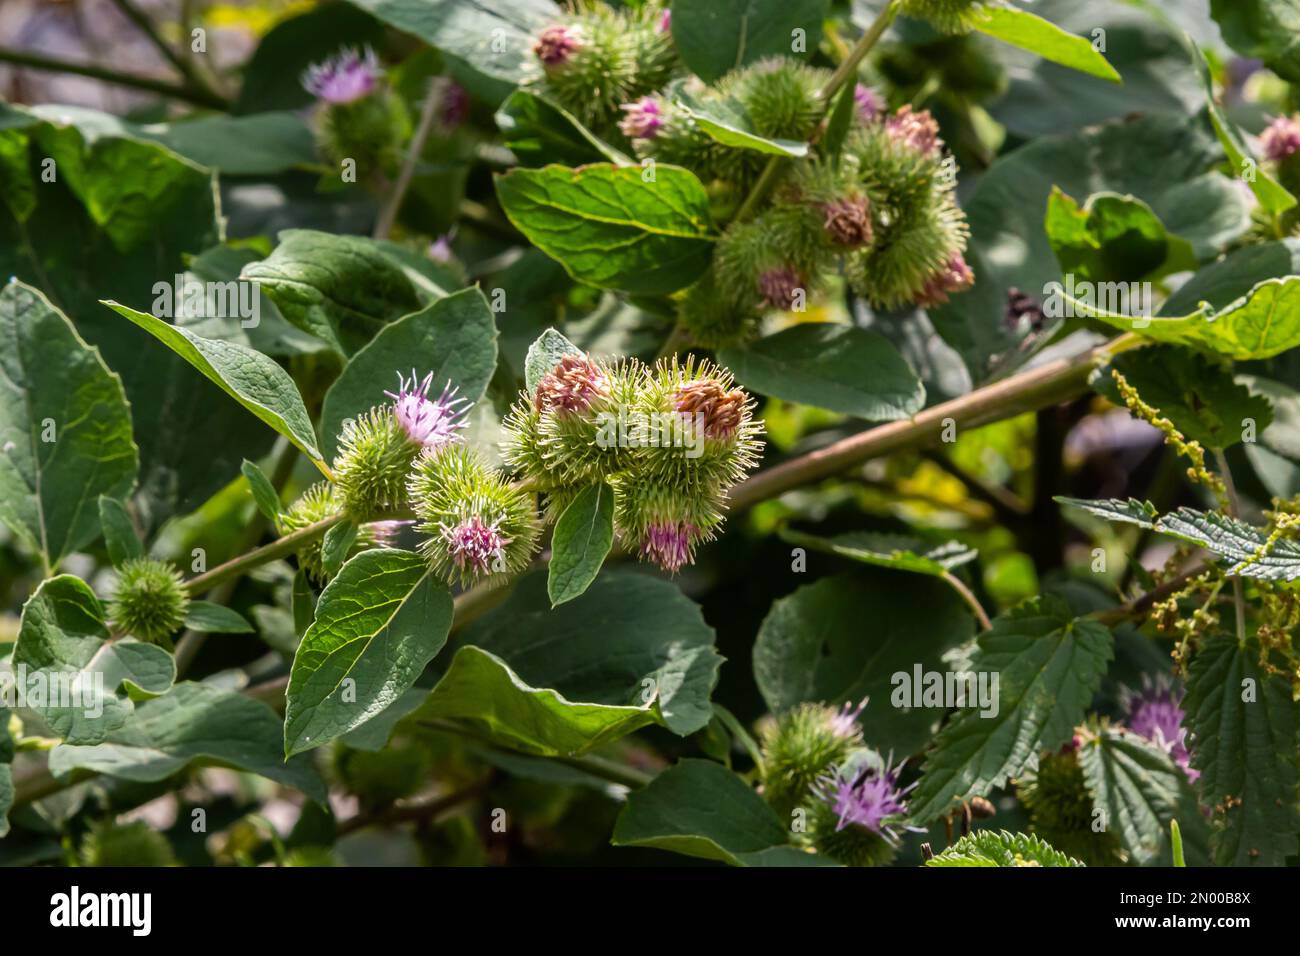 Closeup of a budding Greater Burdock or Arctium Lappa plant in its blurred own natural habitat. It is summertime now. Stock Photo